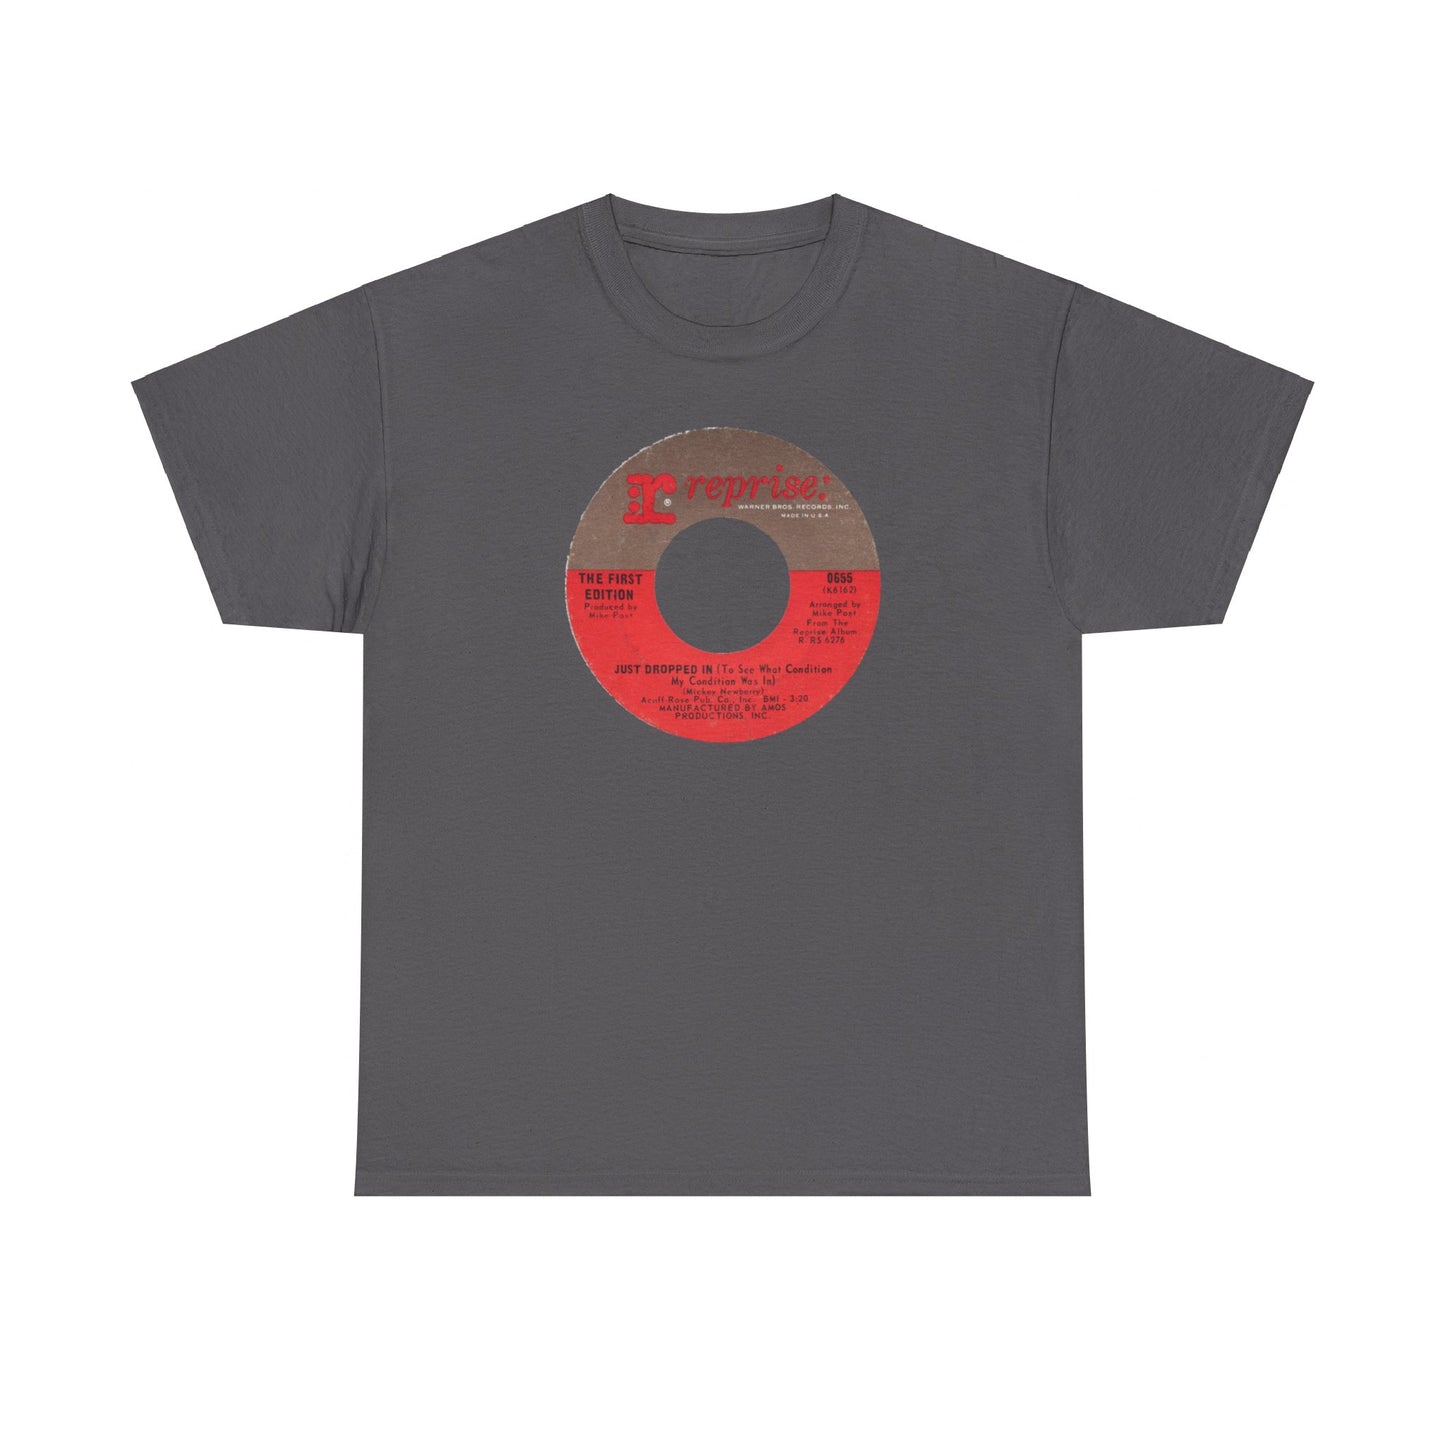 45rpm Tee #23: The First Edition Just Dropped In (To See What Condition my Condition Was In)